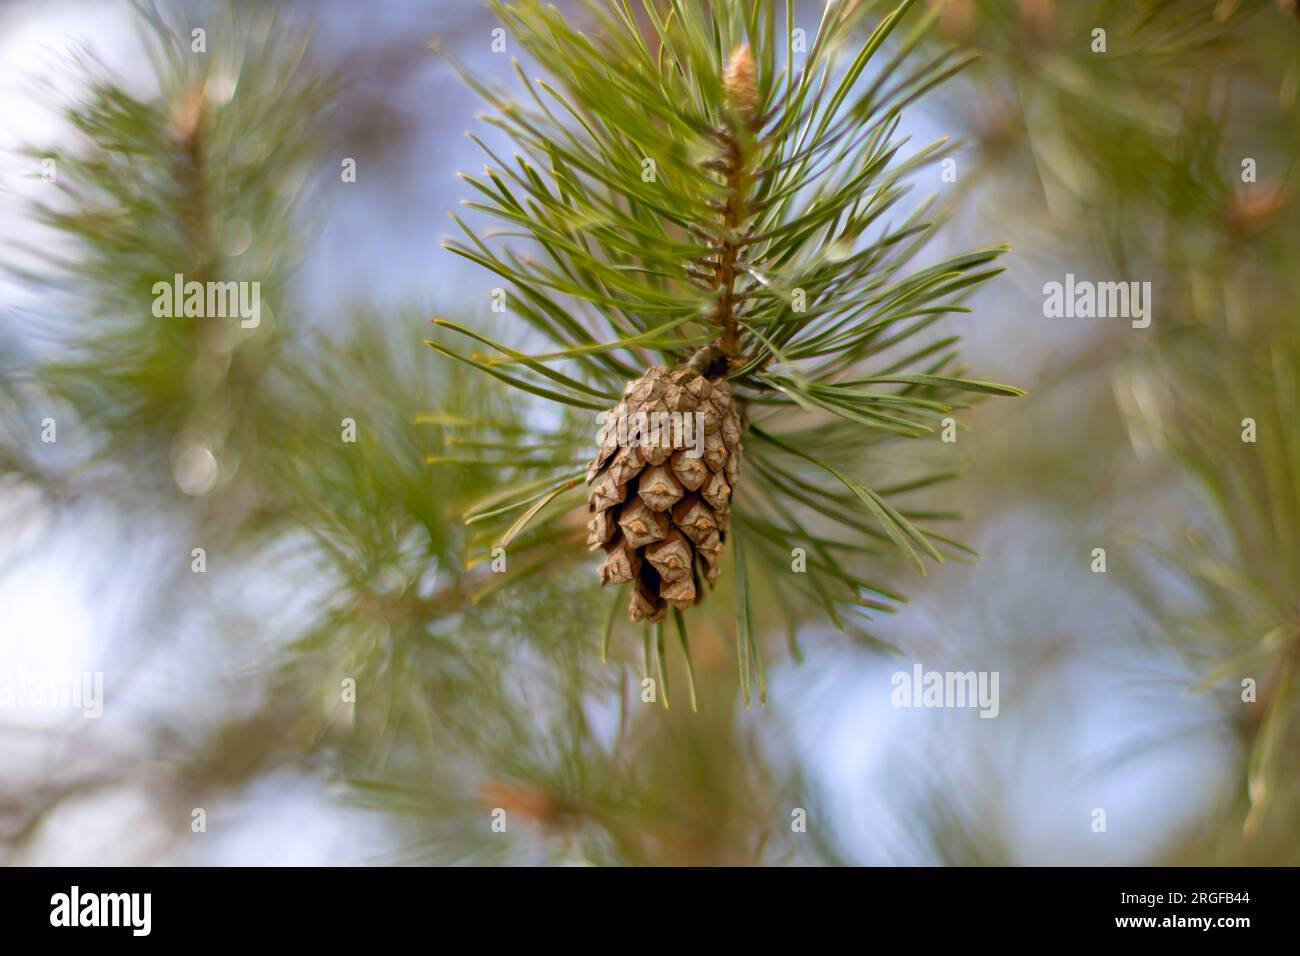 A Close up of a pine tree cone Stock Photo